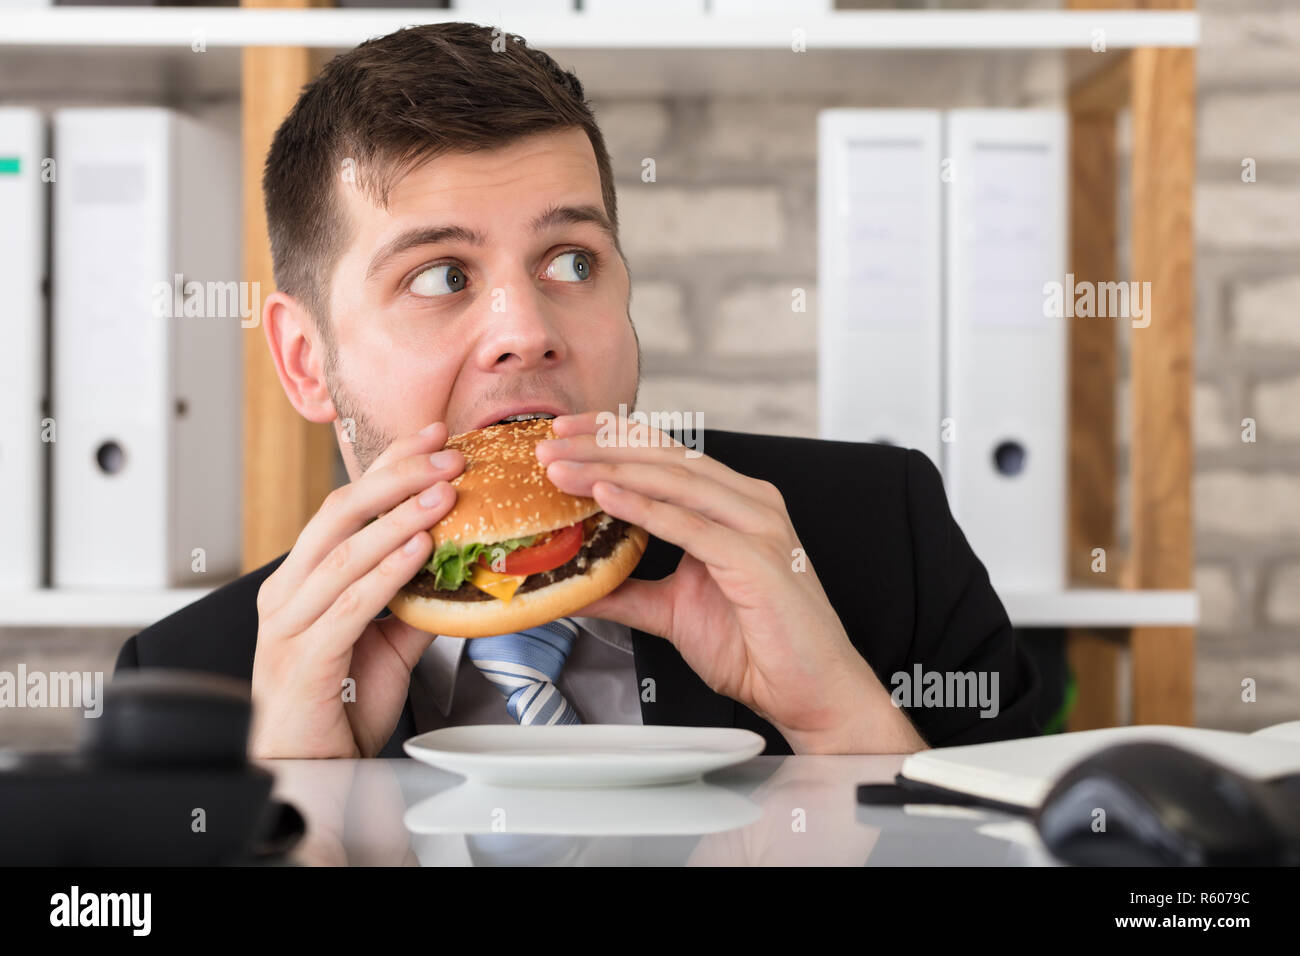 Handsome Young Businessman Eating Burger Stock Photo